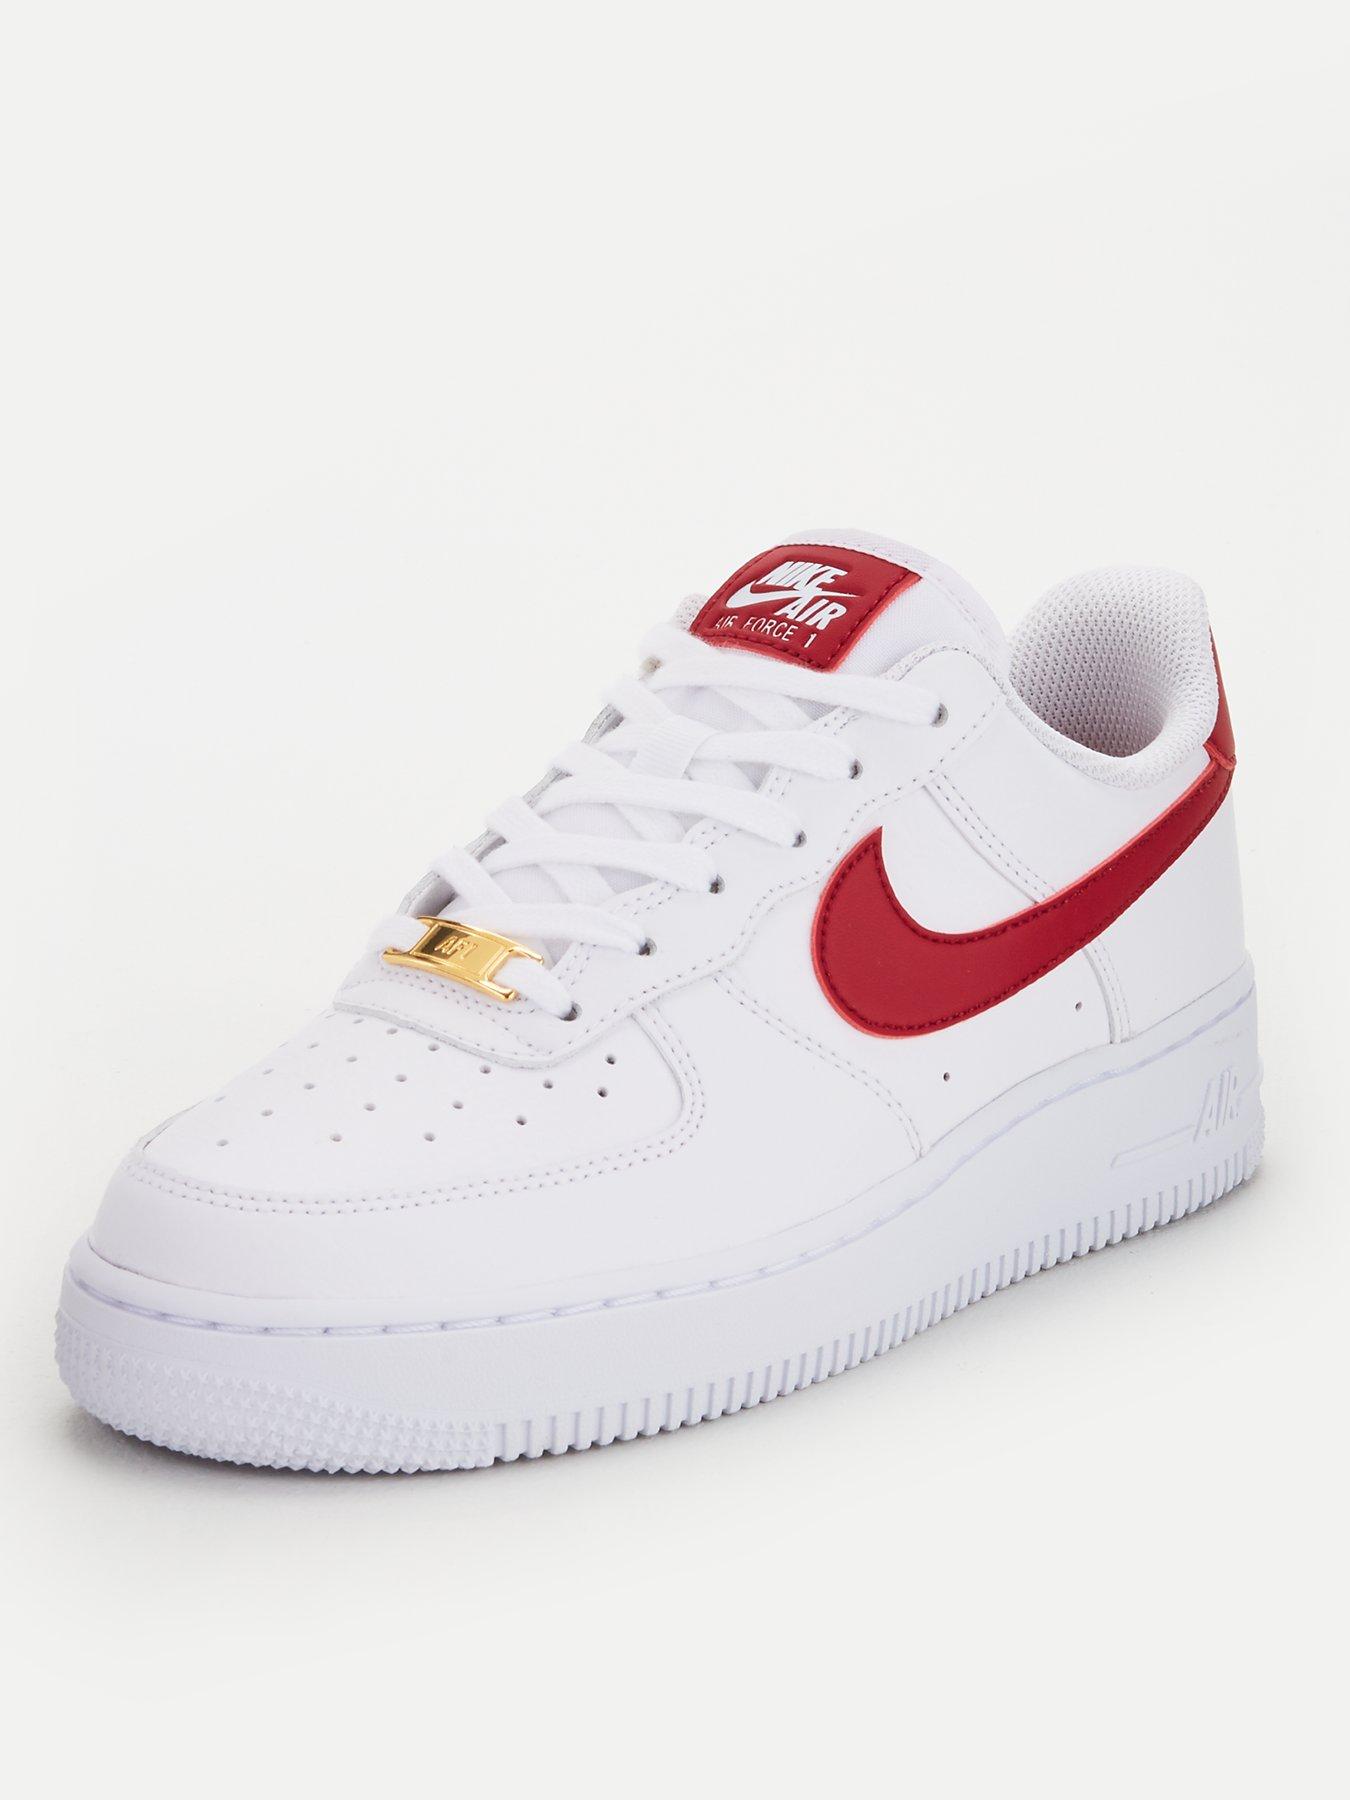 air force 1 sizing